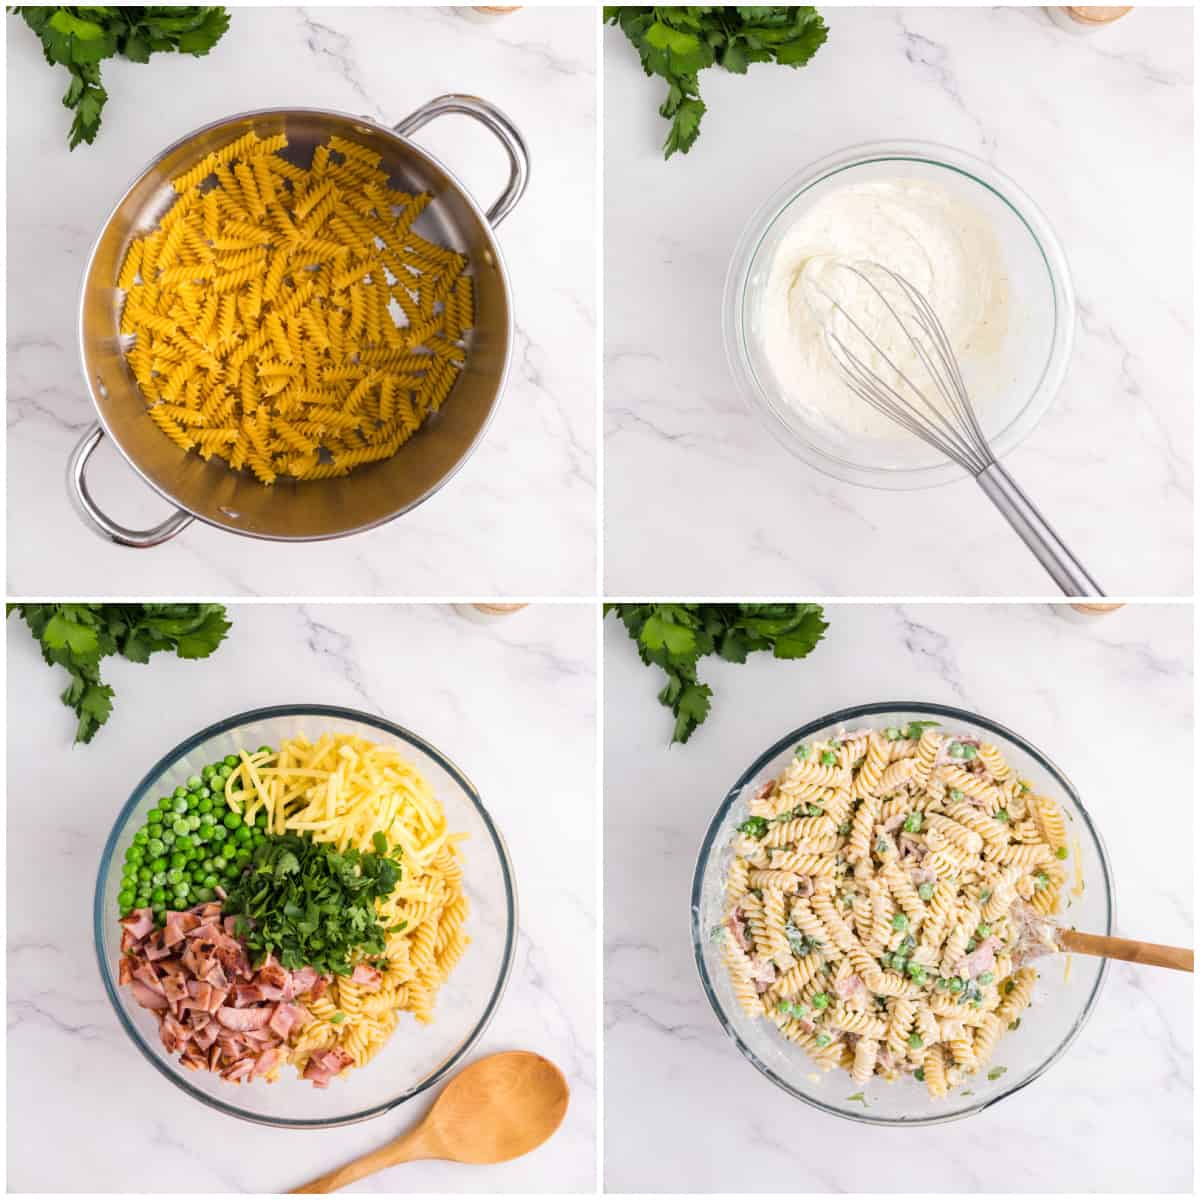 Step by step photos on how to make a Bacon Ranch Pasta Salad.